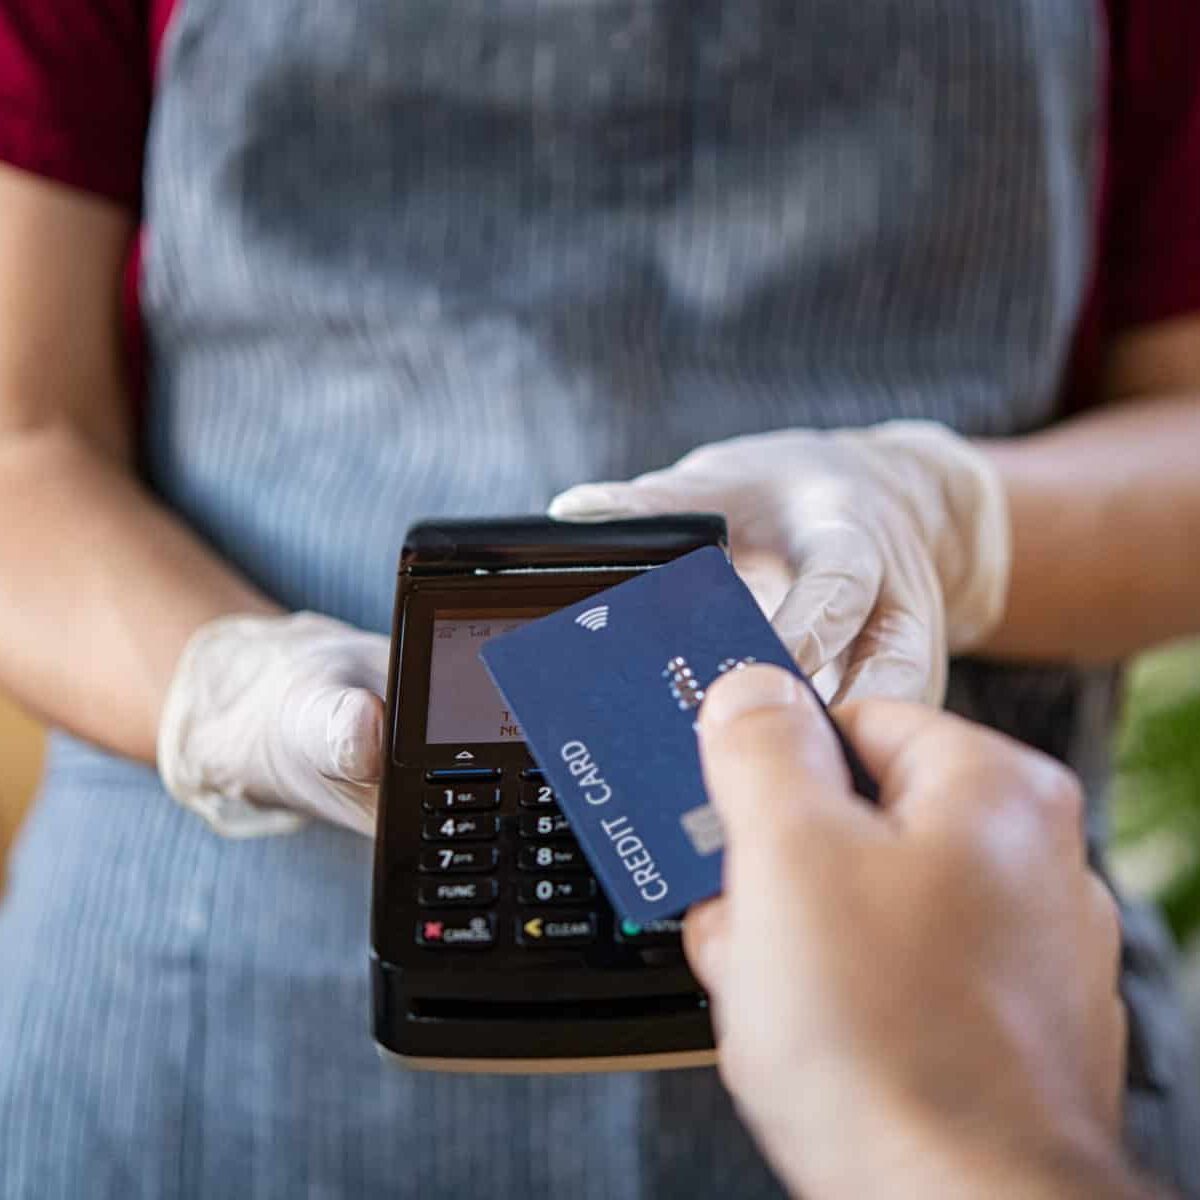 Waitress holding credit card reader machine and wearing protective disposable gloves at bar counter with client holding credit card. Man paying bill with credit card. Hand of customer paying with contactless credit card with NFC technology.